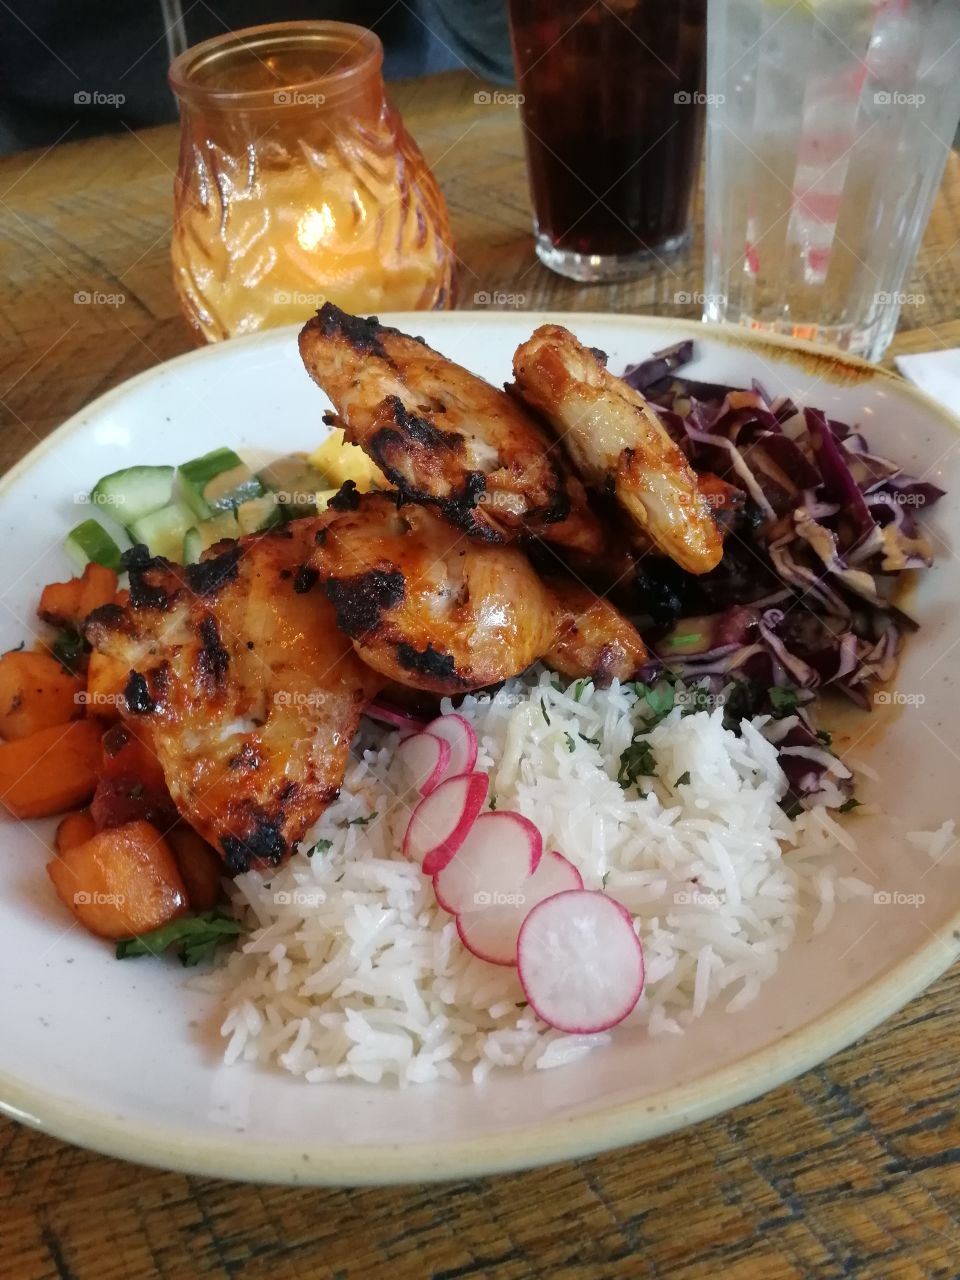 Delicious chicken and rice bowl from cabana london